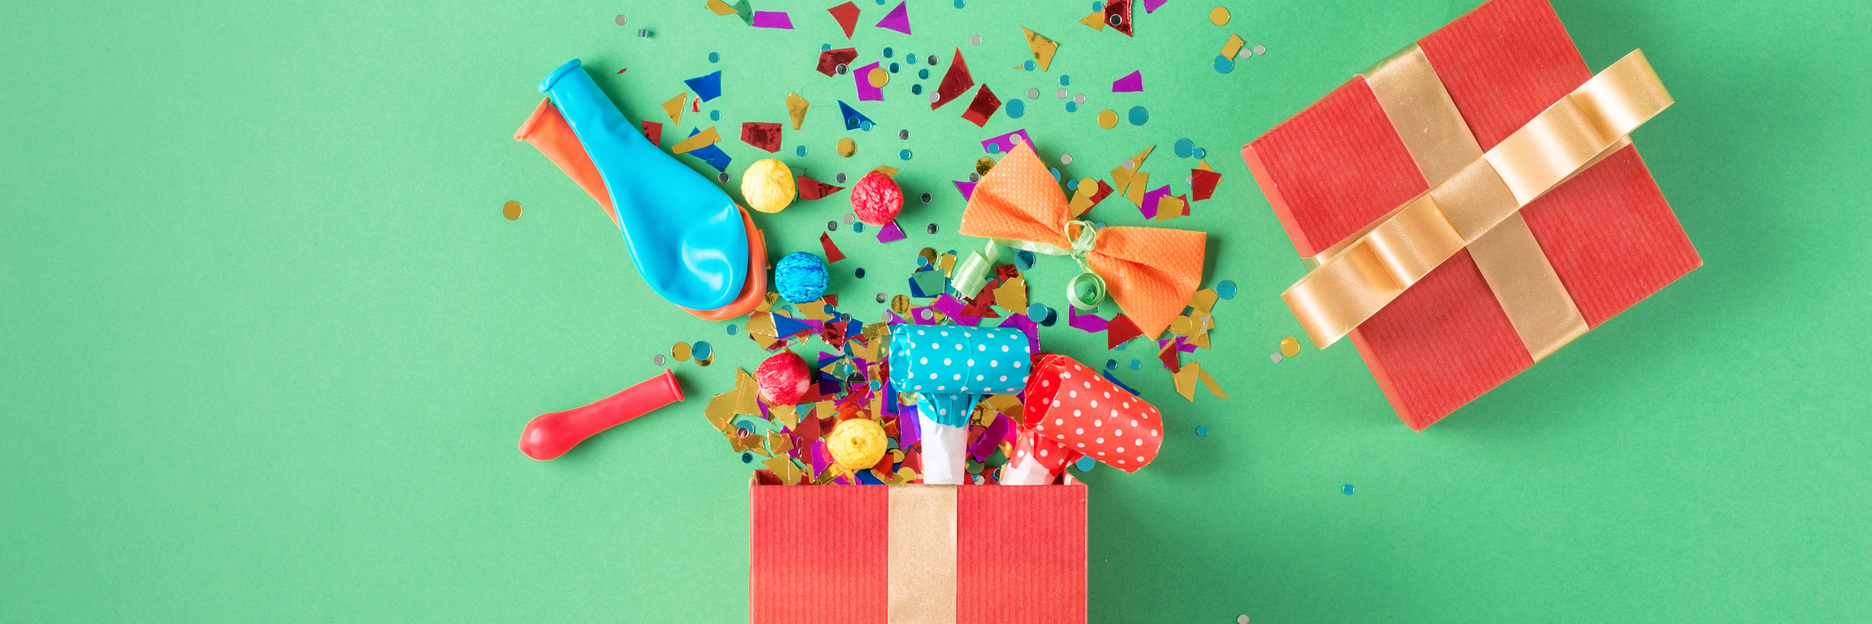 Red gift box with various party confetti, balloons, streamers, noisemakers and decoration on a green background. Colorful celebration background. Flat lay.